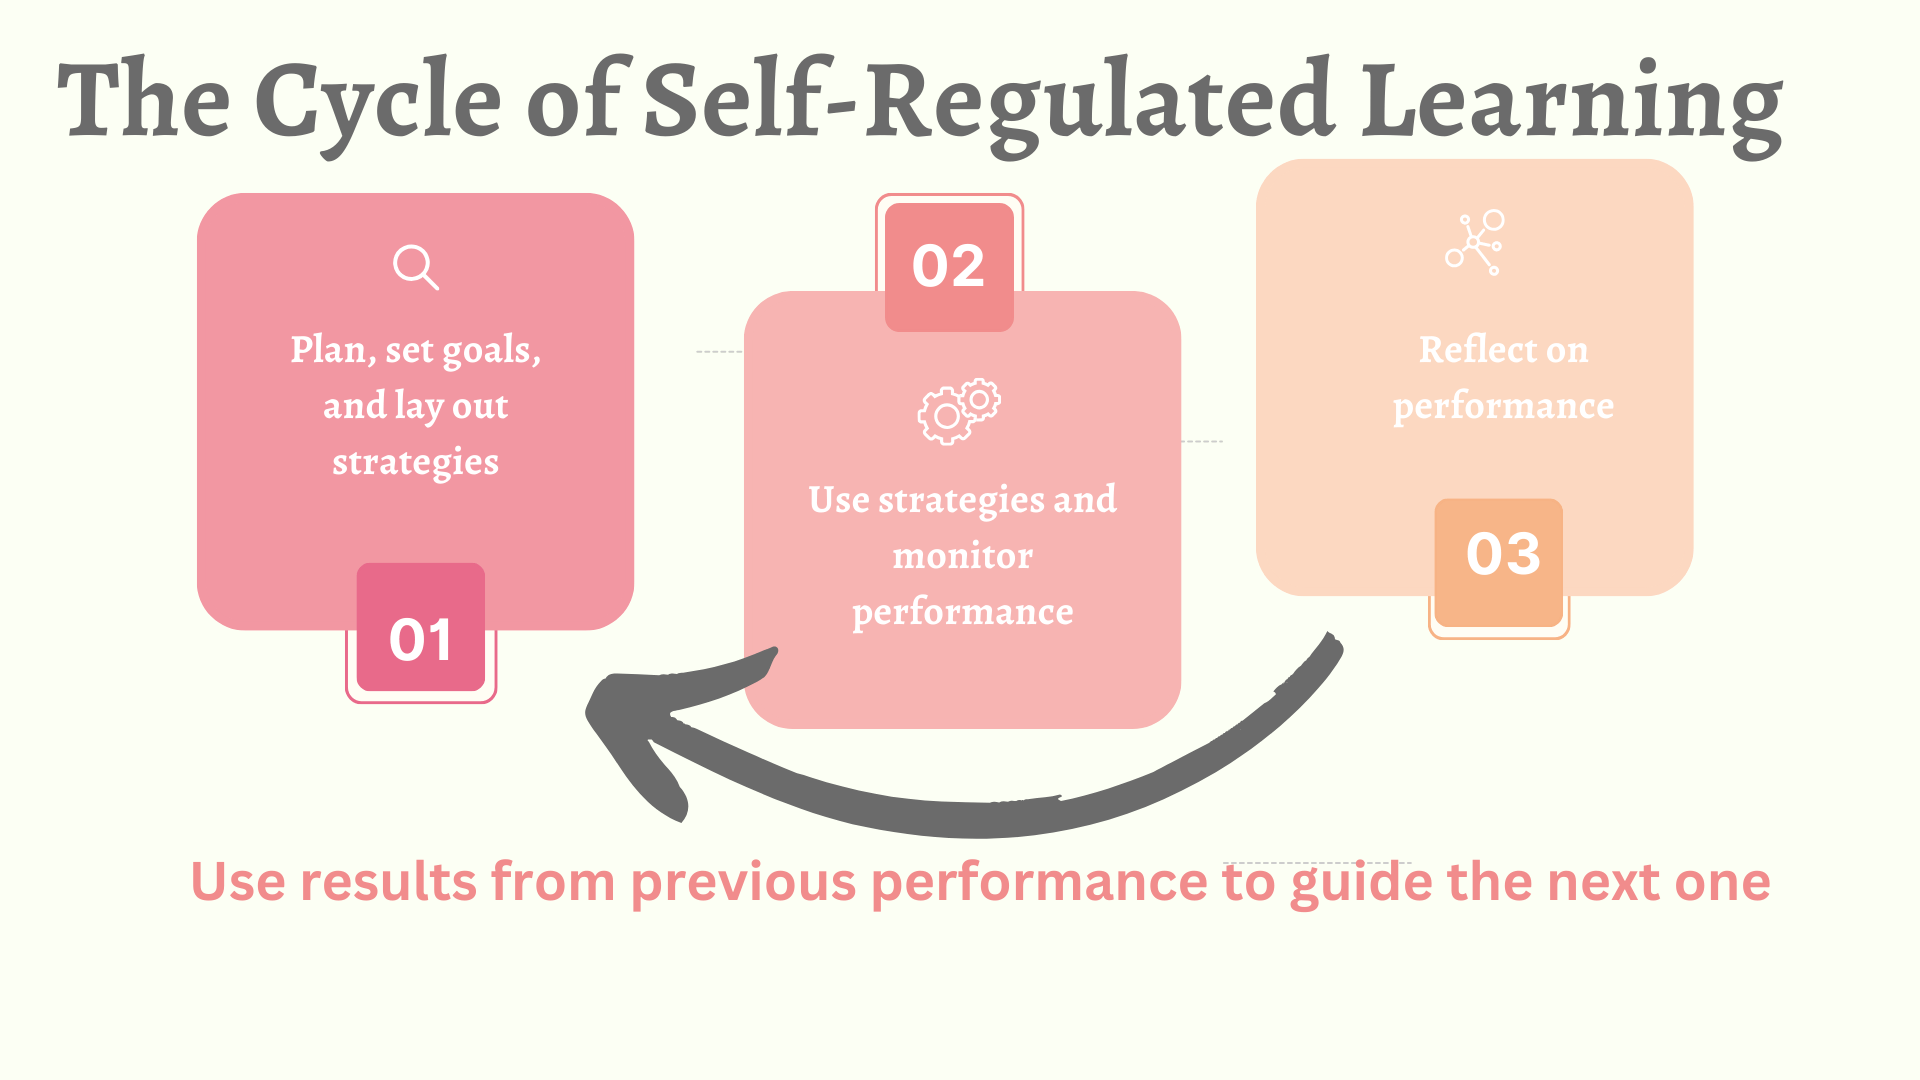 A figure showing the cycle of self-regulated learning